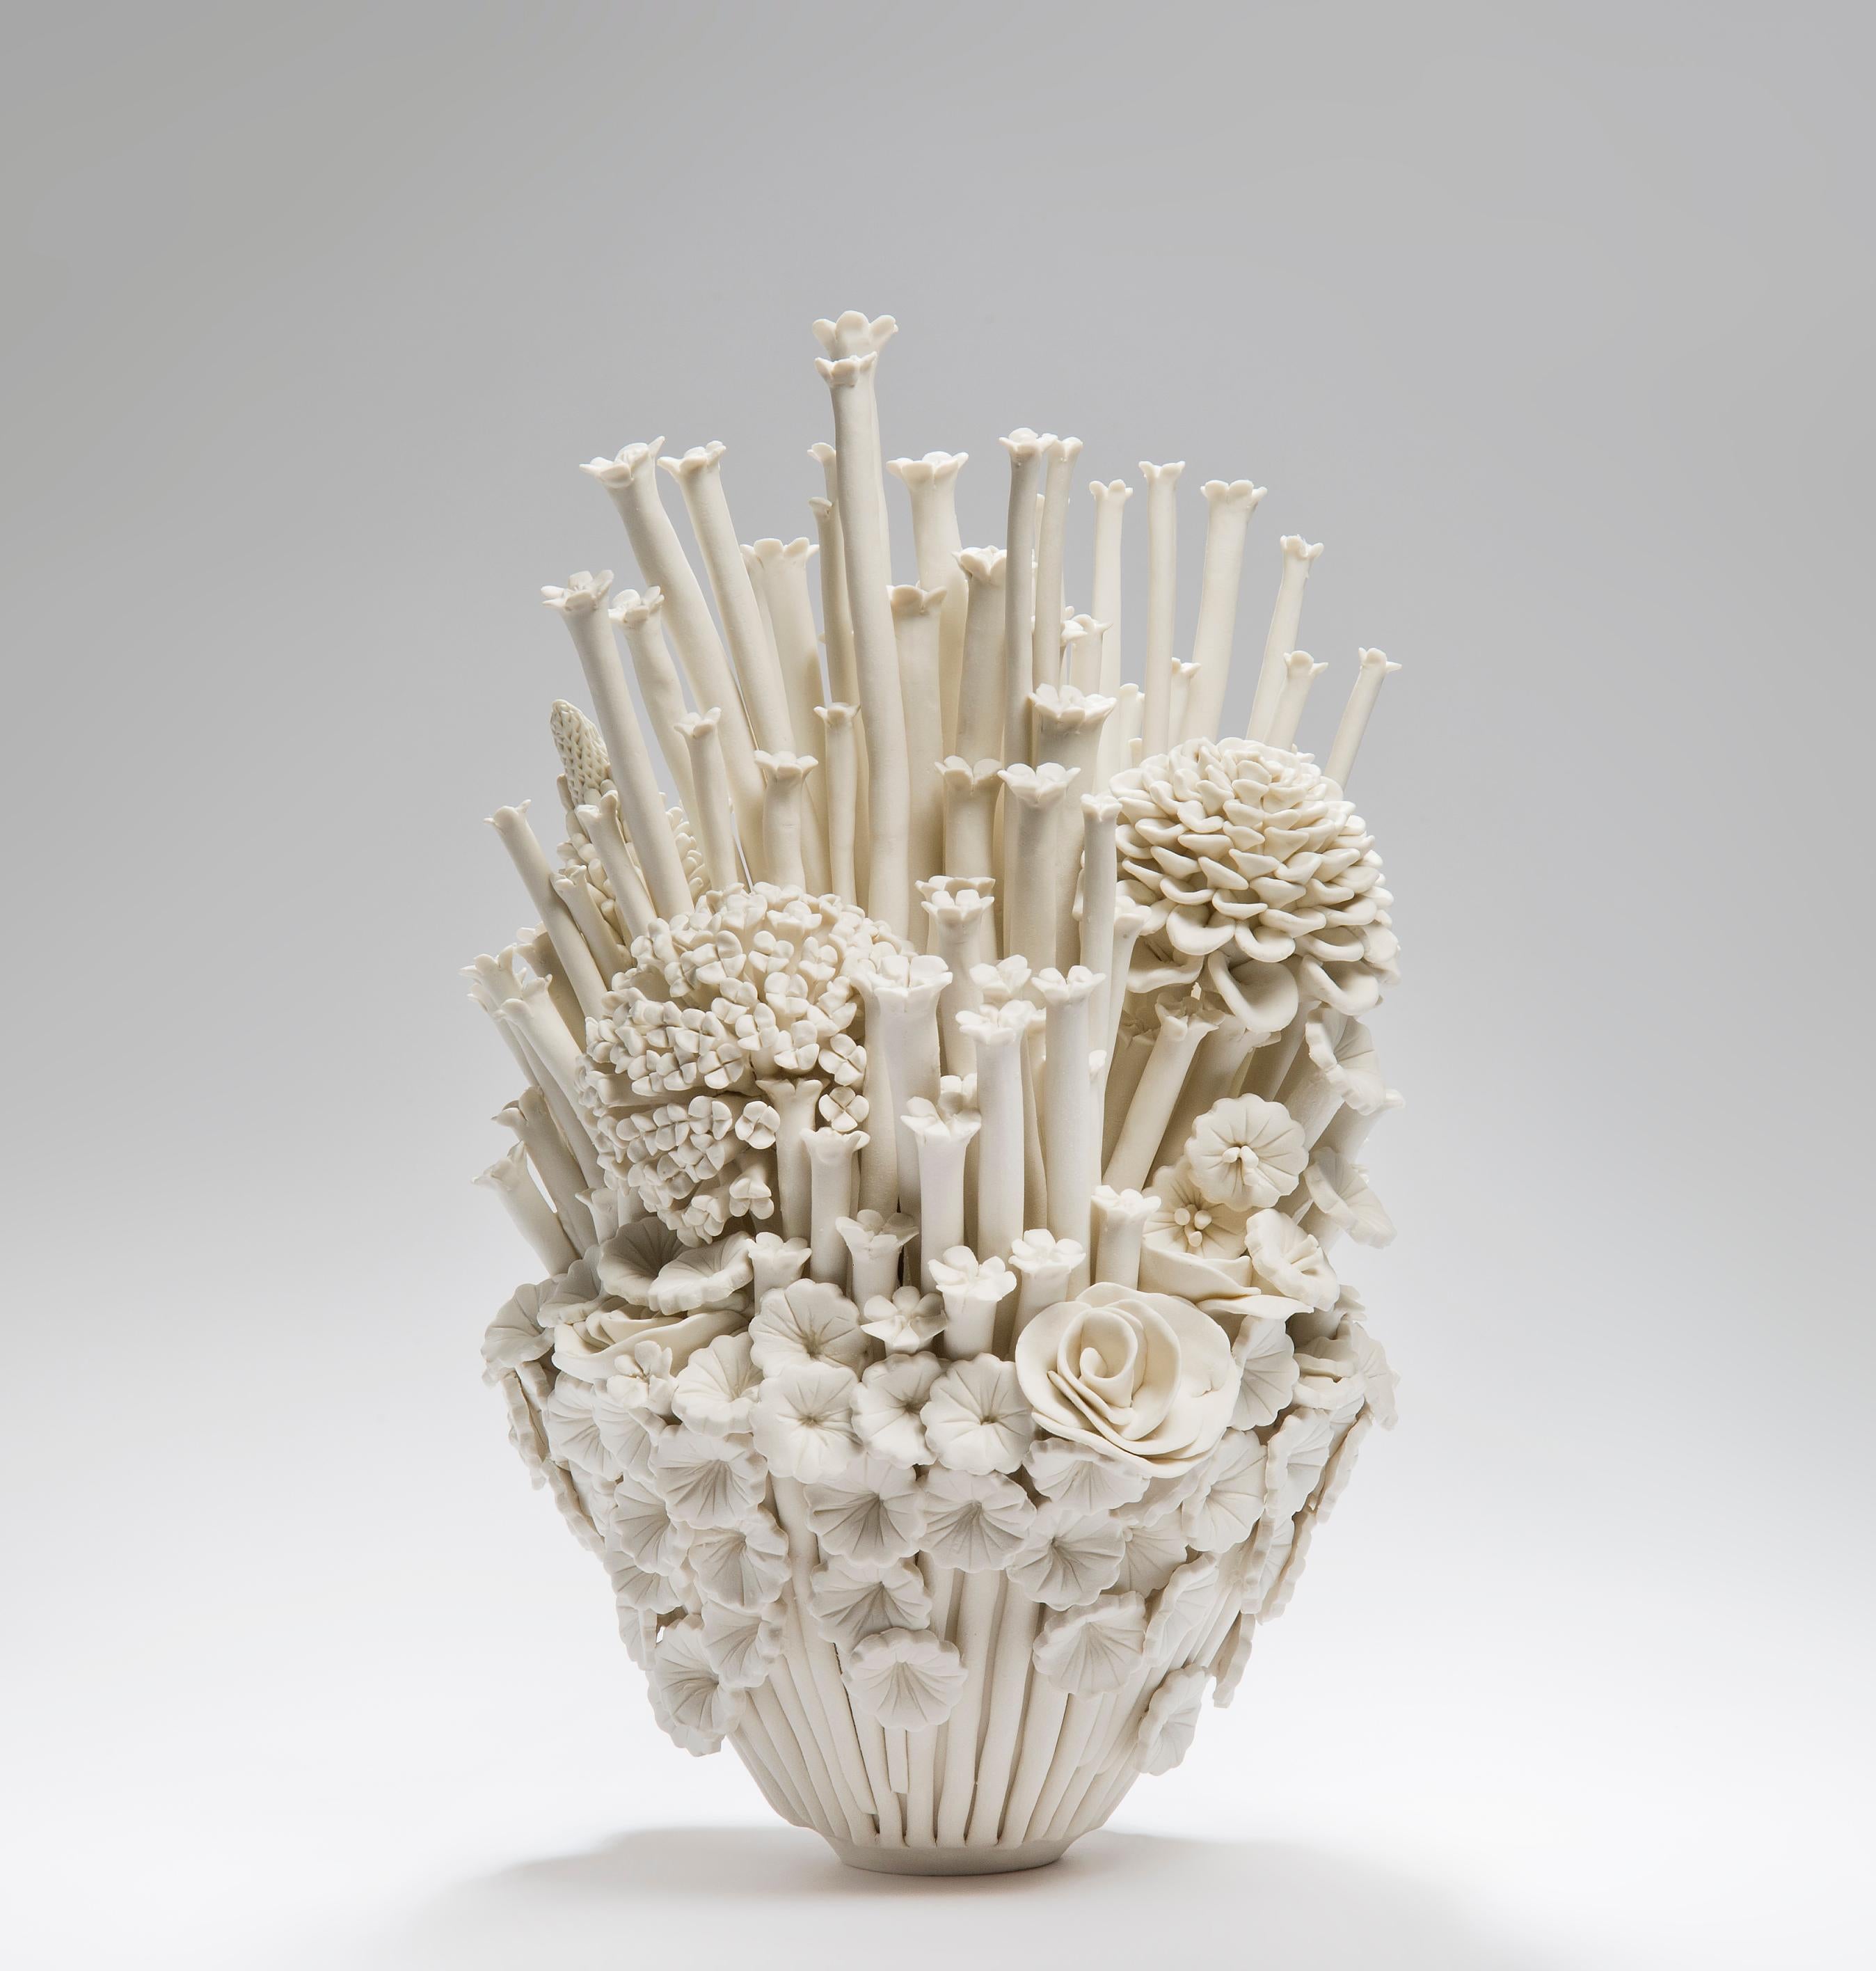 Efflorescence III, is a unique hand-sculpted porcelain sculpture completely covered in hundreds of individually made porcelain flowers of all different shapes and forms by the British artist Vanessa Hogge.

Vanessa Hogge breathes life into her